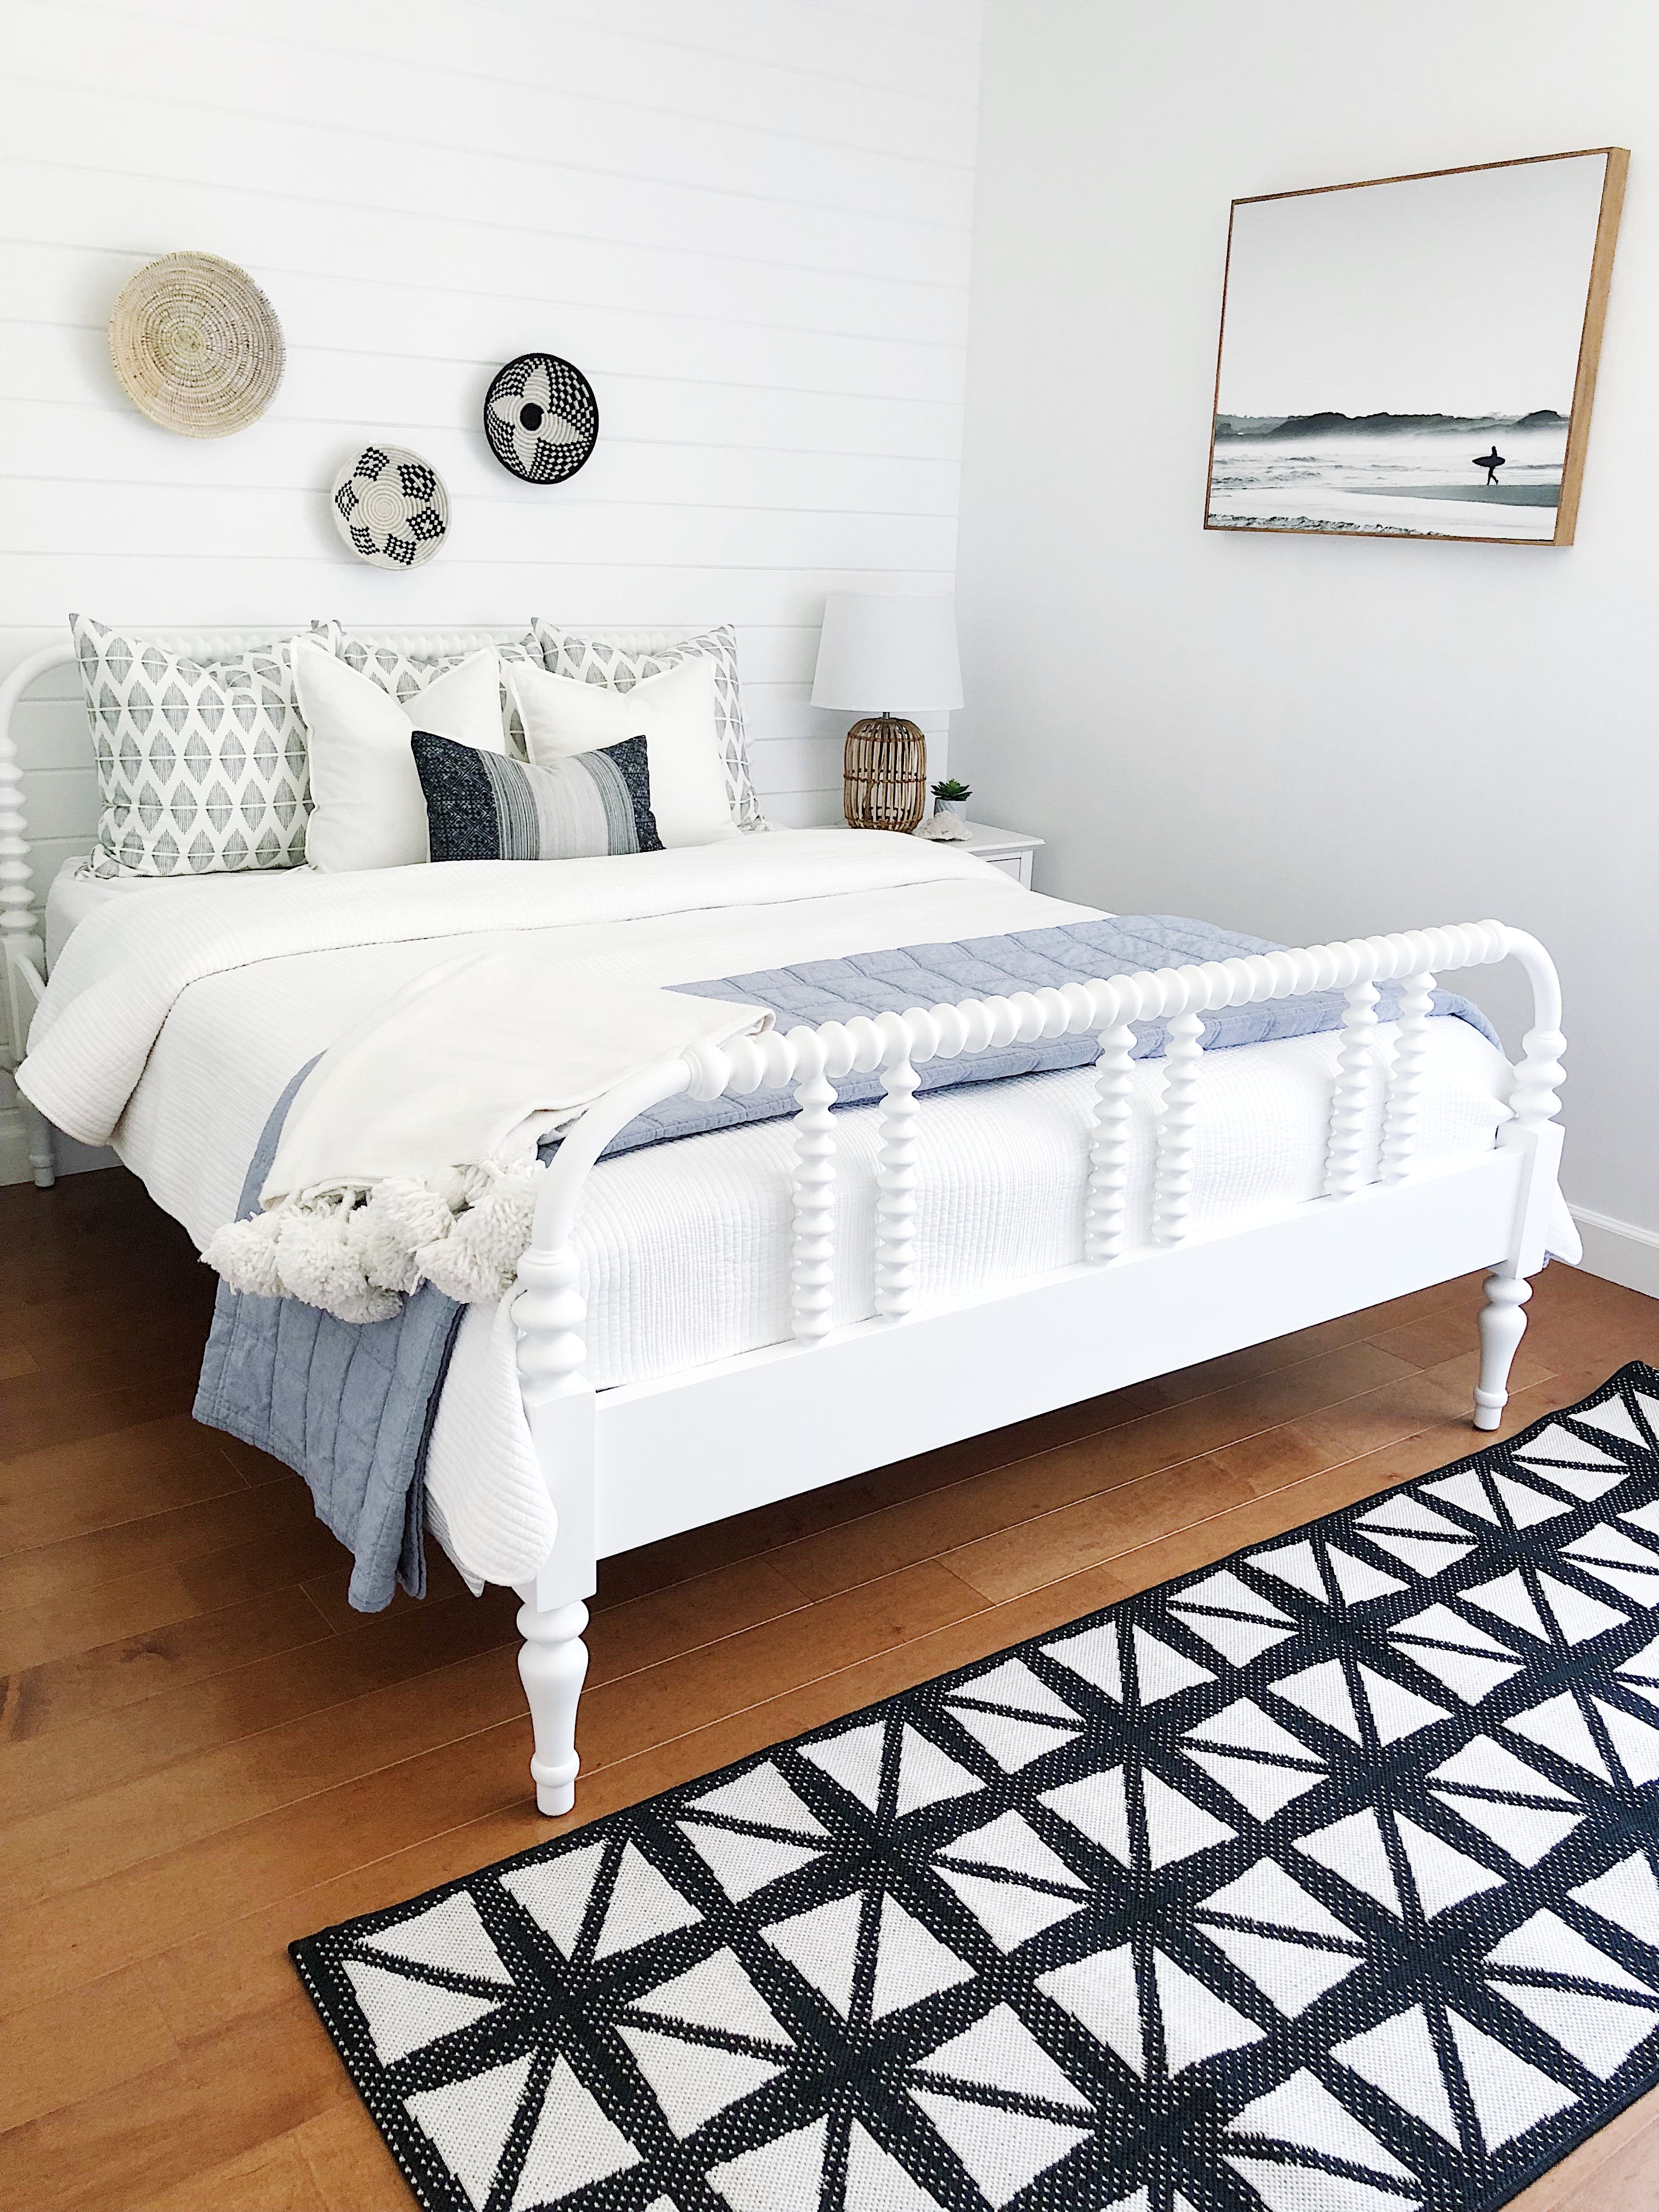 Achieving a Chic Coastal Bedroom